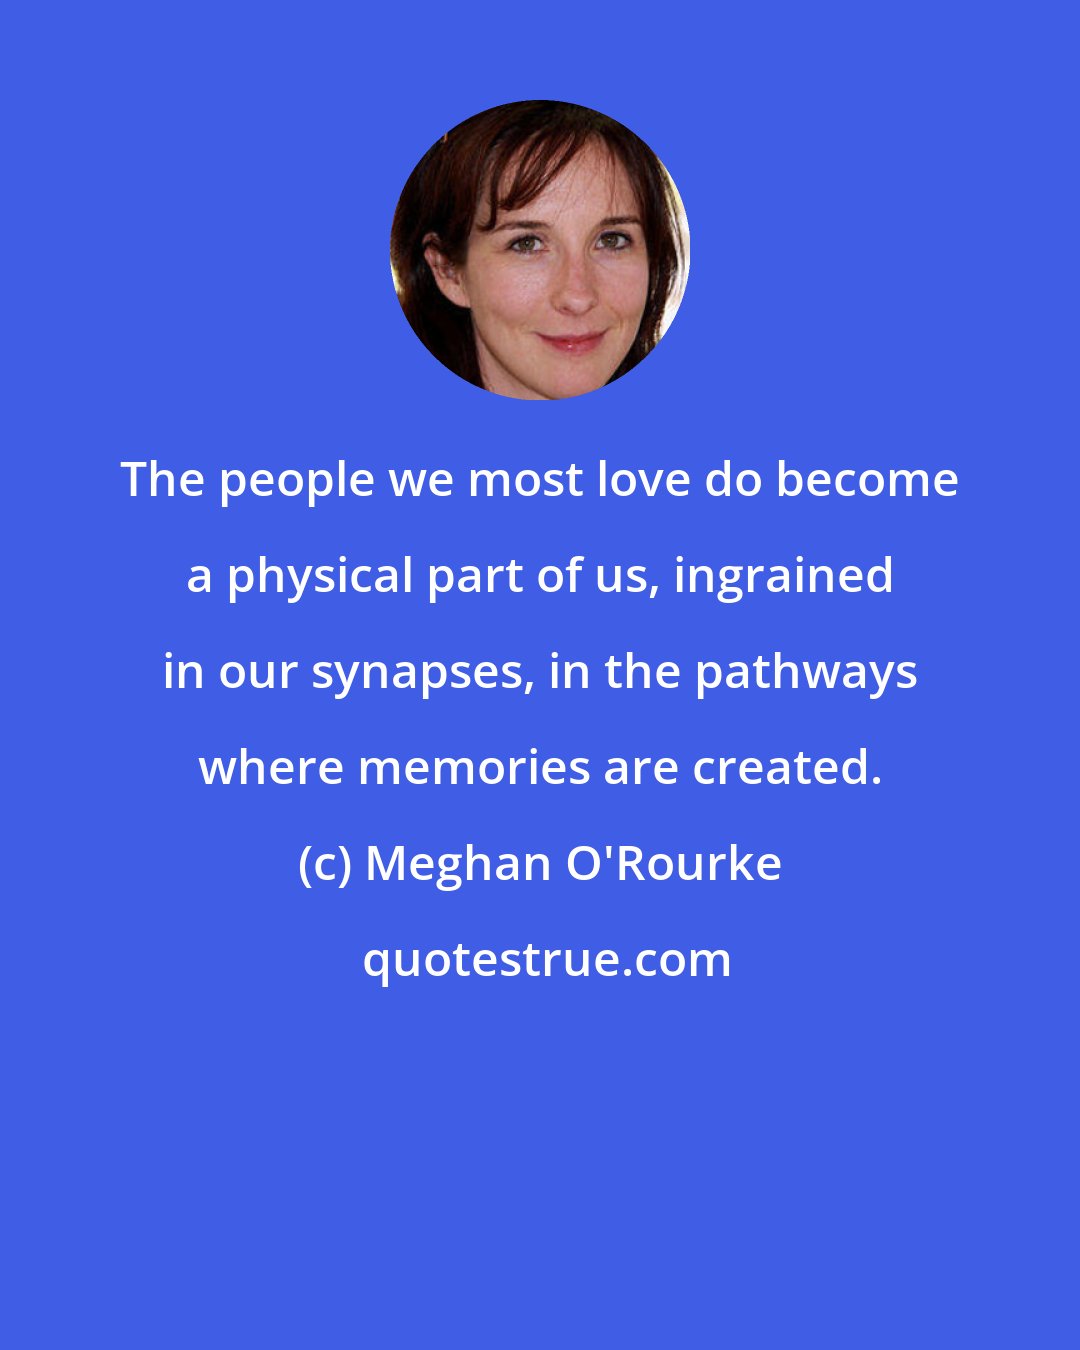 Meghan O'Rourke: The people we most love do become a physical part of us, ingrained in our synapses, in the pathways where memories are created.